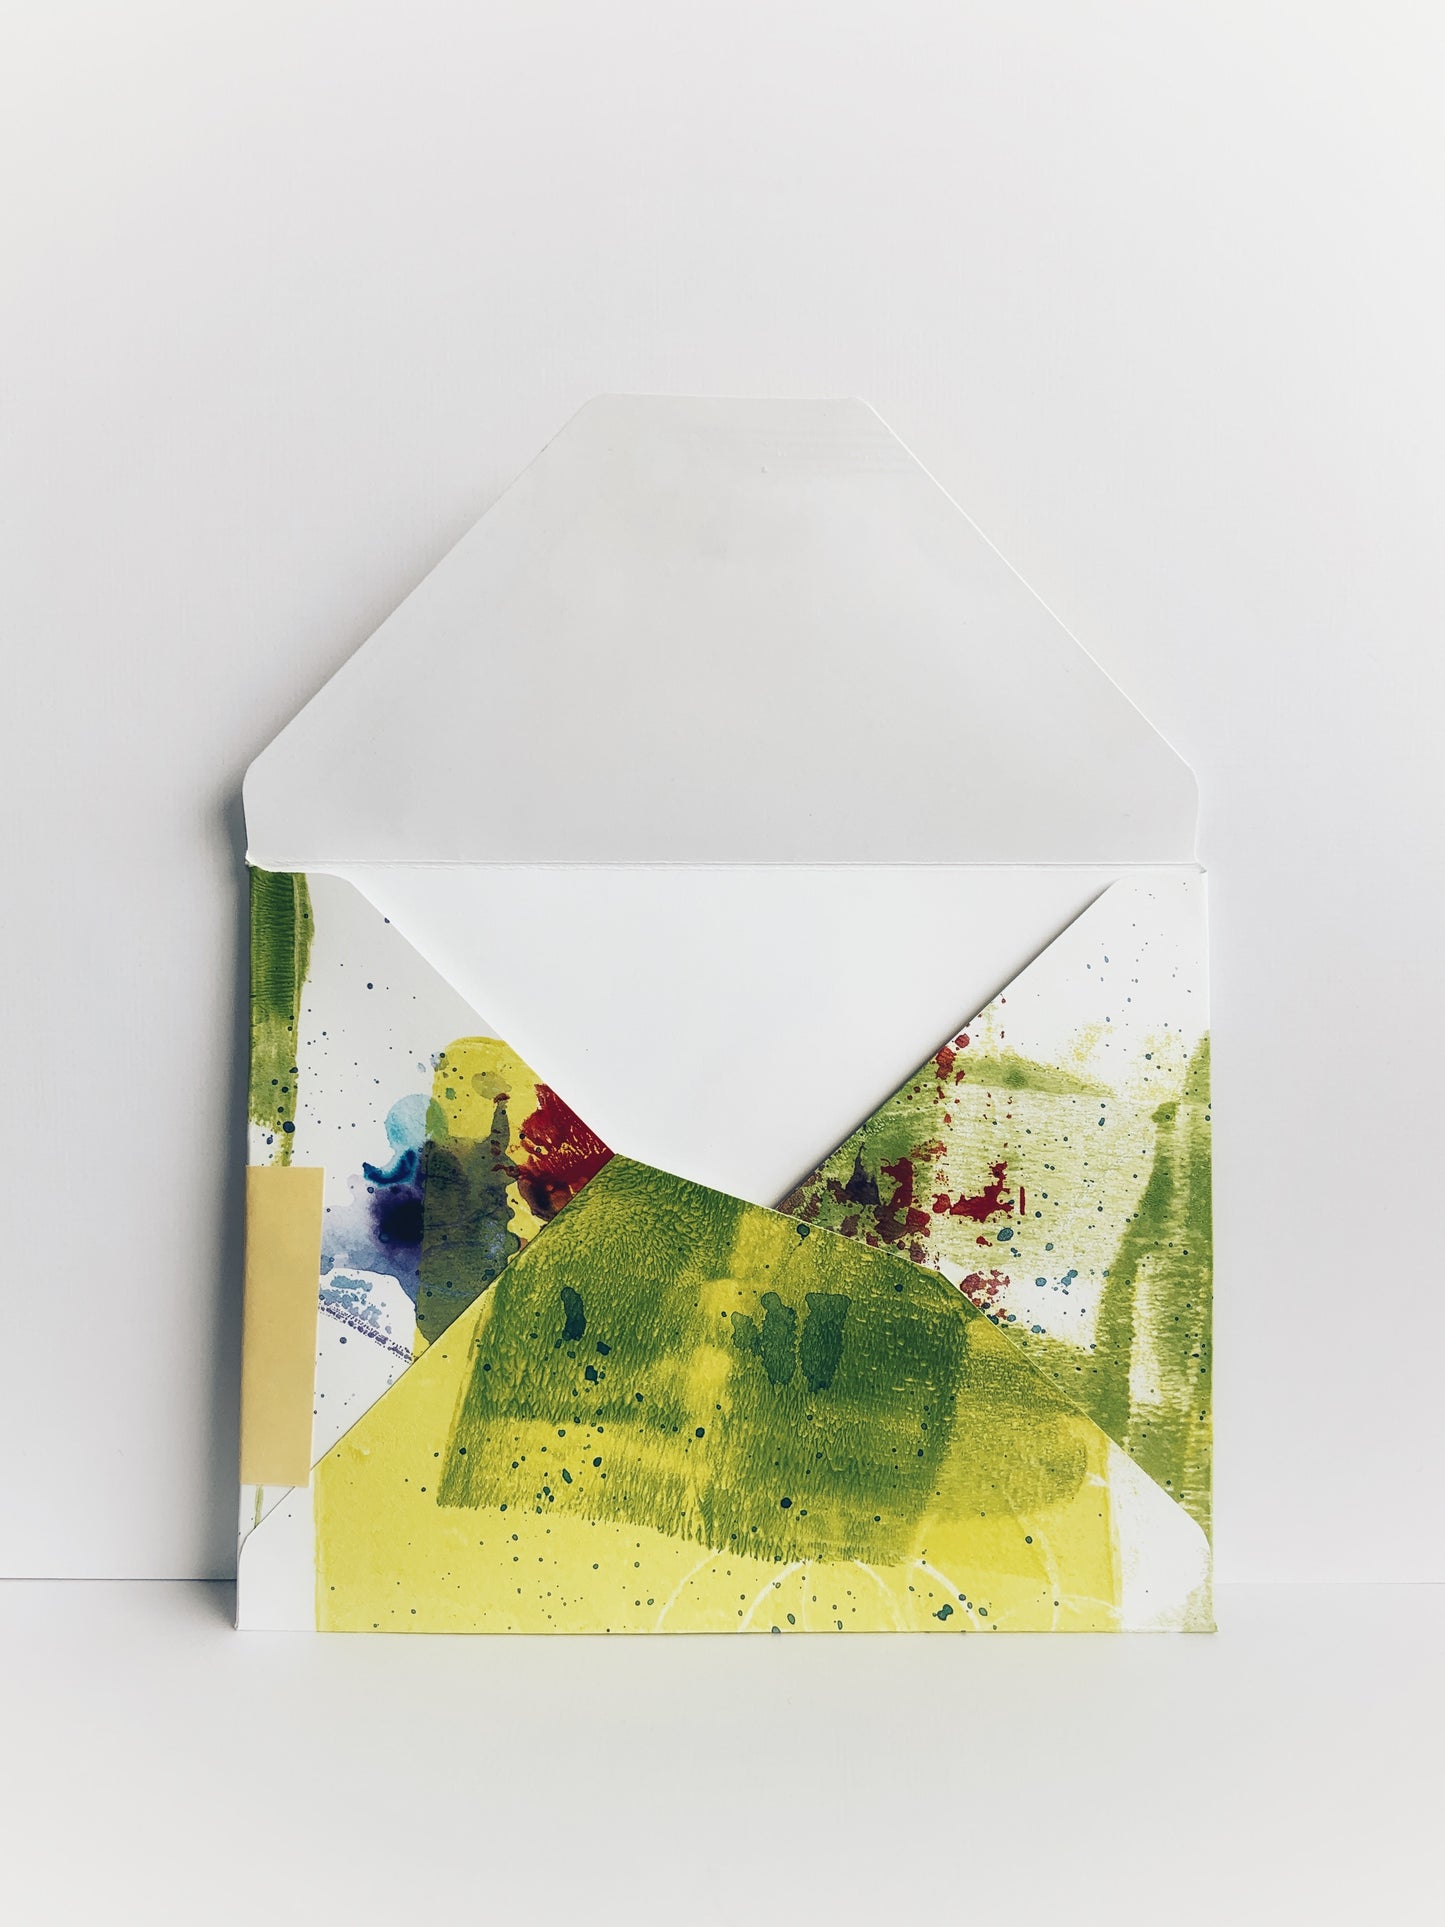 Back of an envelope with irregular design and abstract paint in green, yellow and red